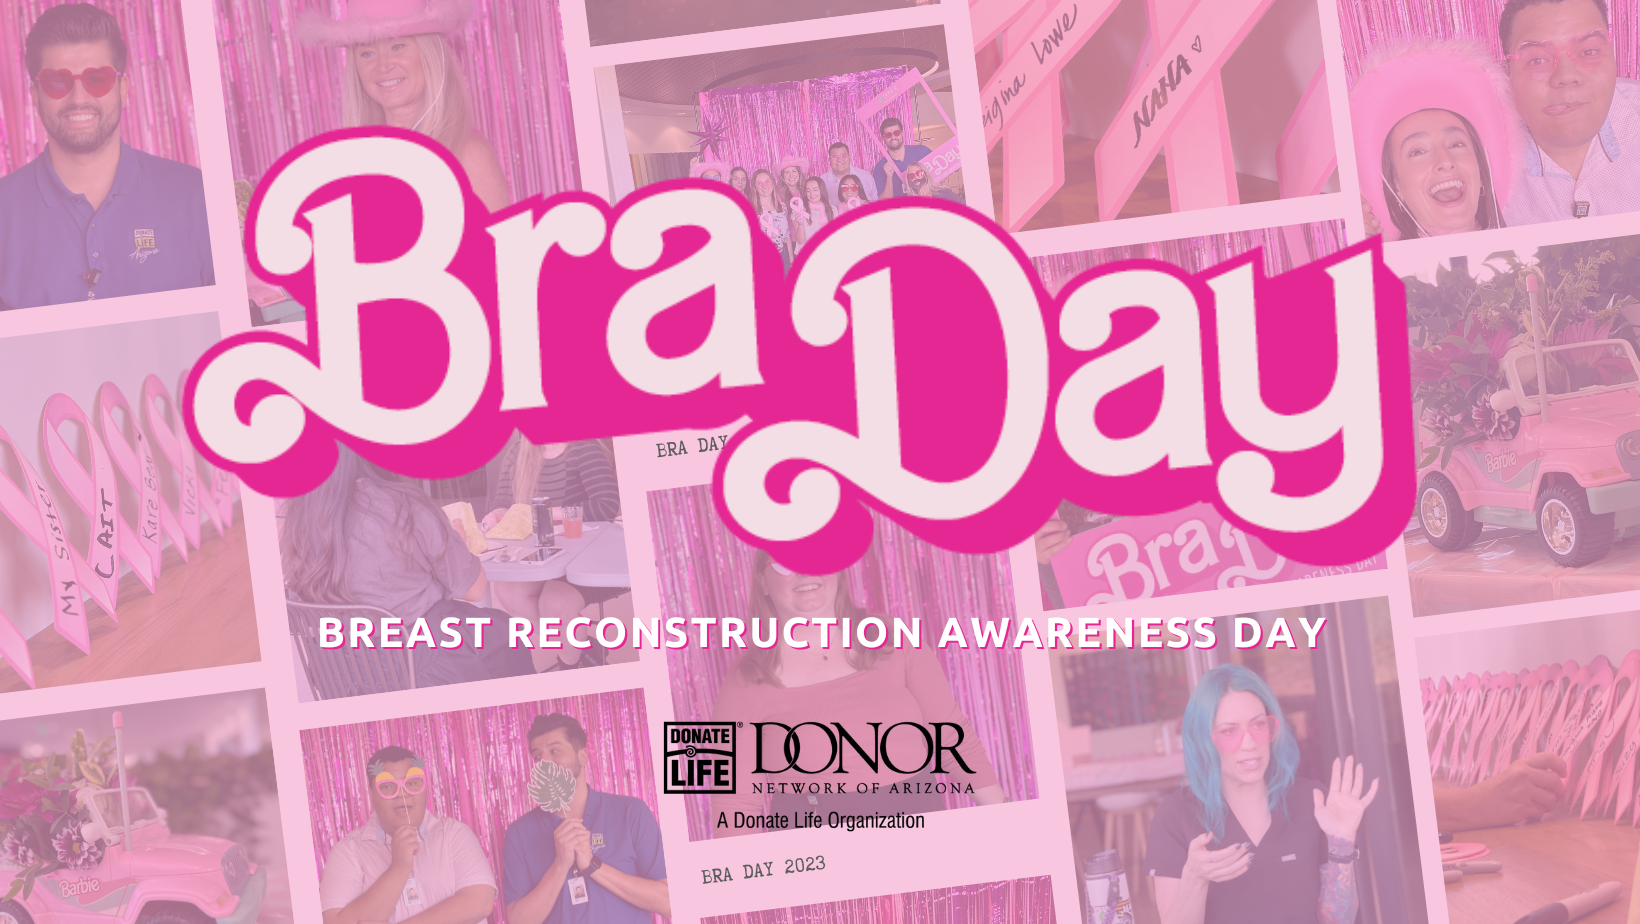 No Bra Day' promotes breast cancer awareness